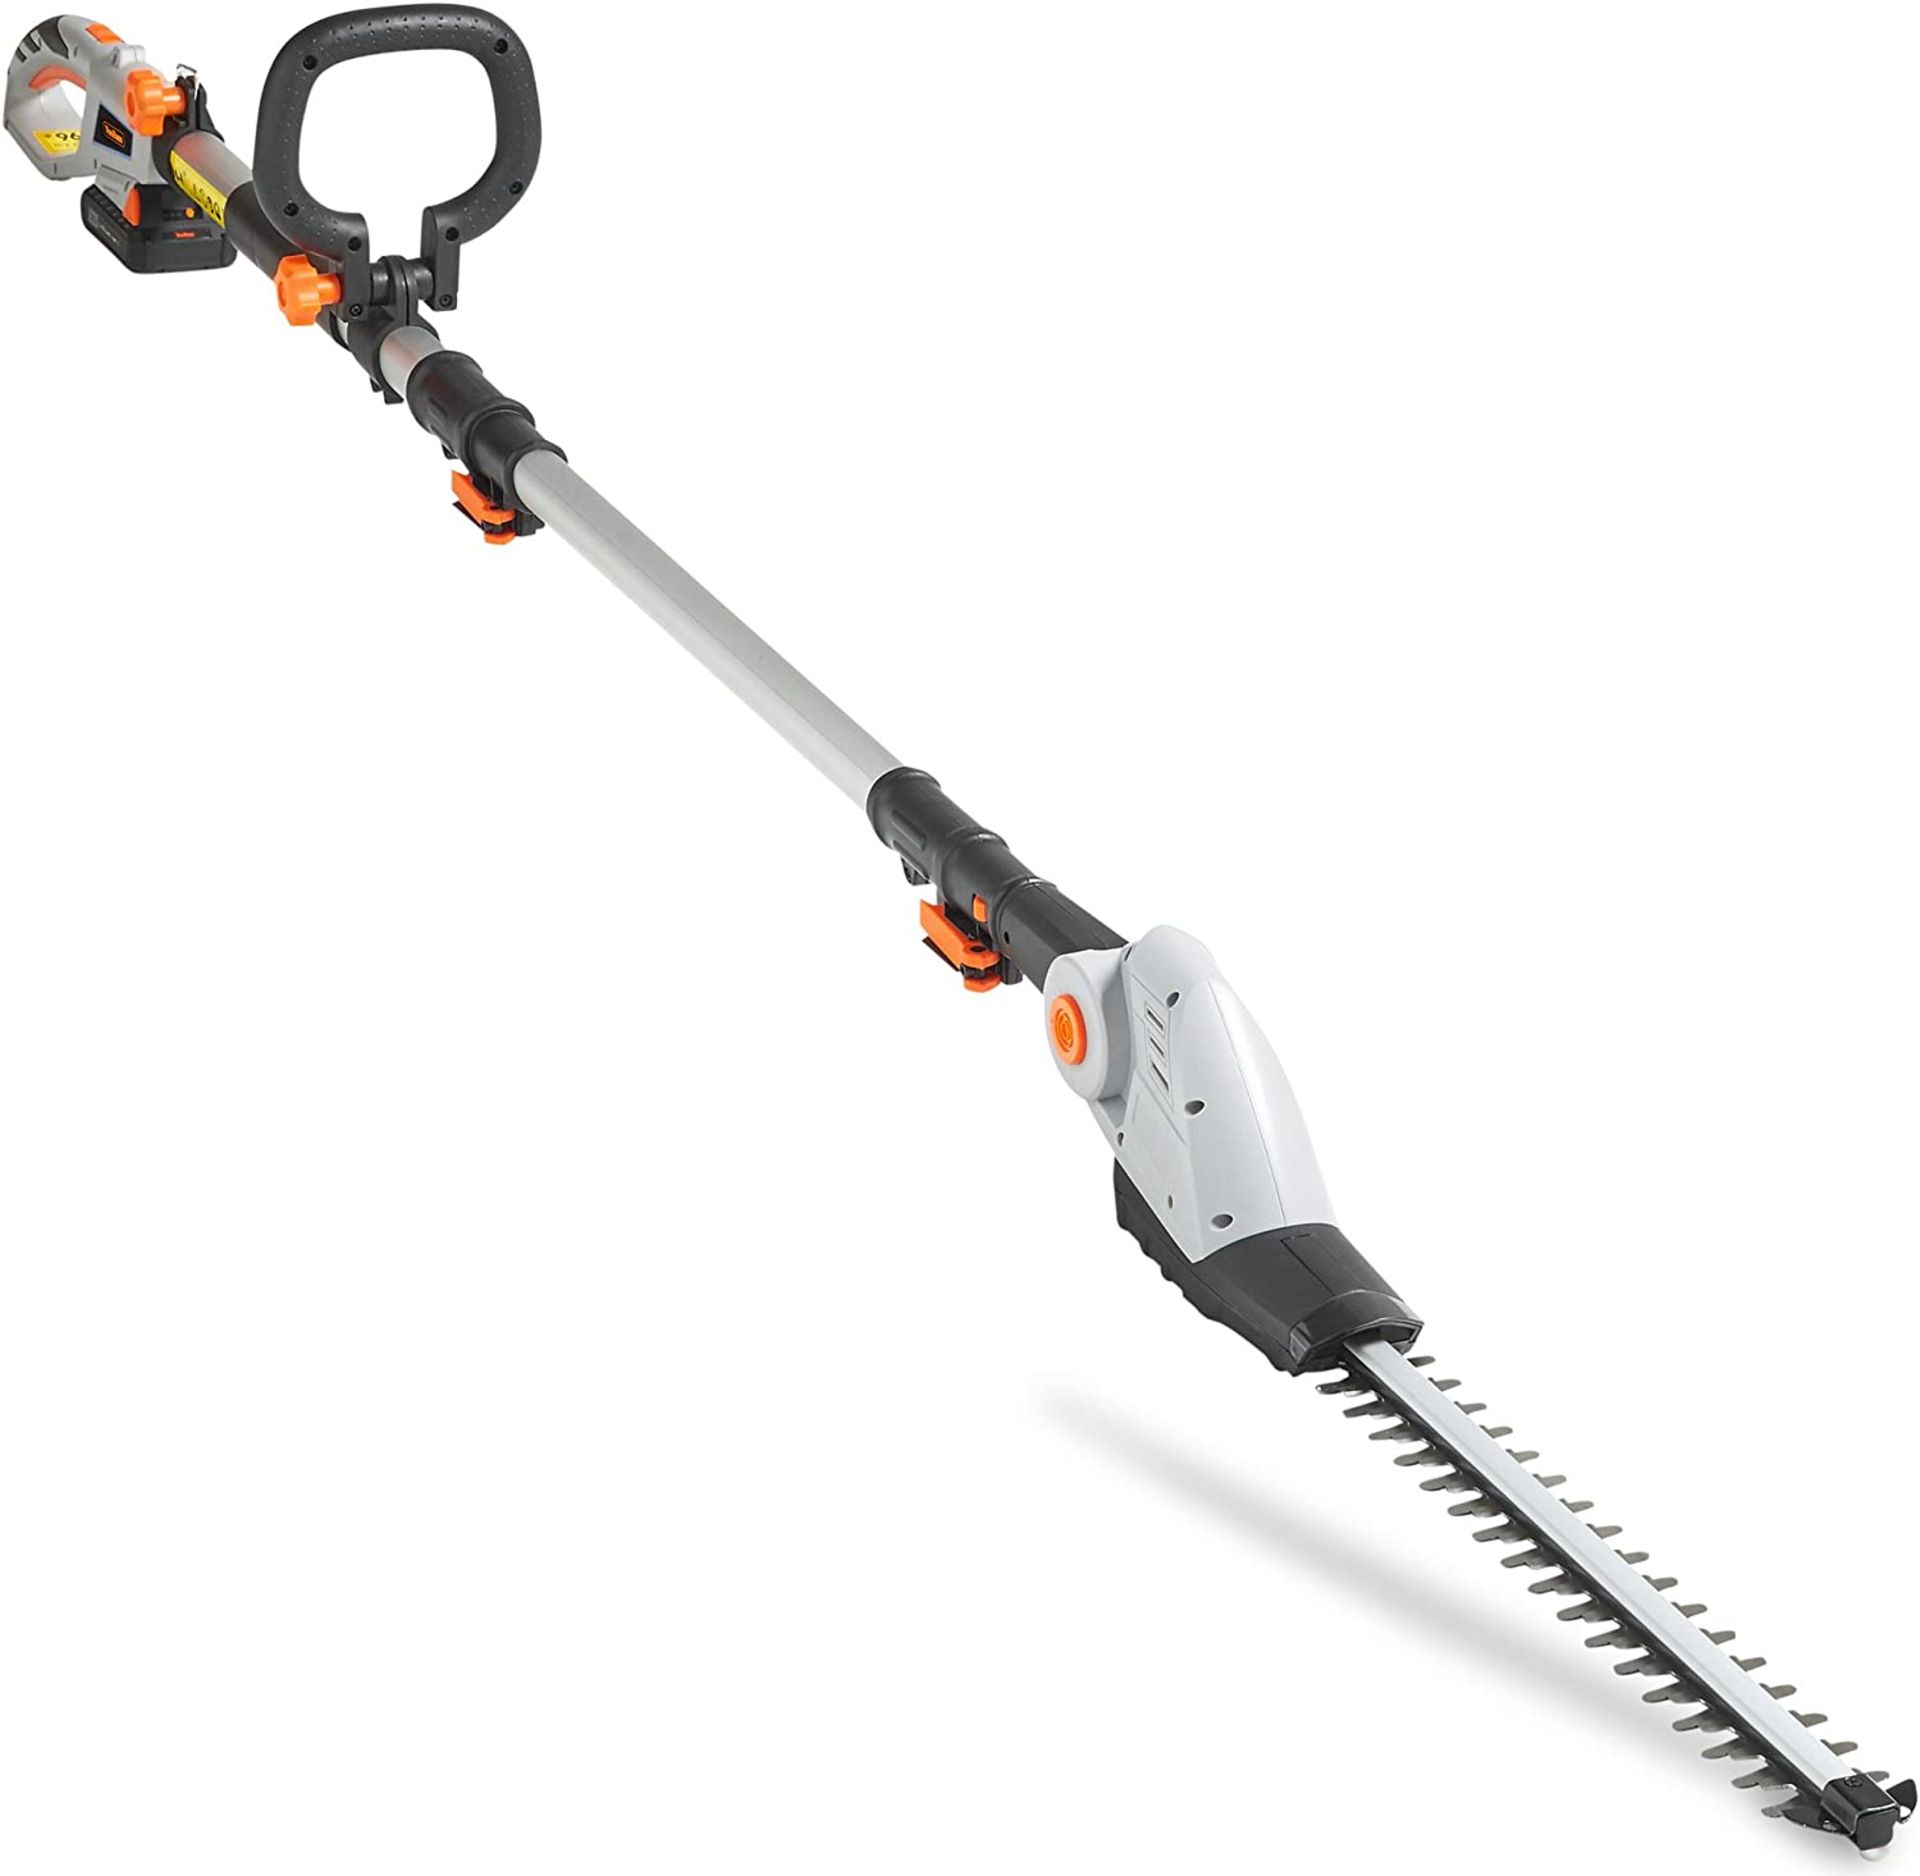 (GE96) Cordless Pole Hedge Trimmer with 20V MAX Battery, Charger, Shoulder Strap & Blade Cover ...